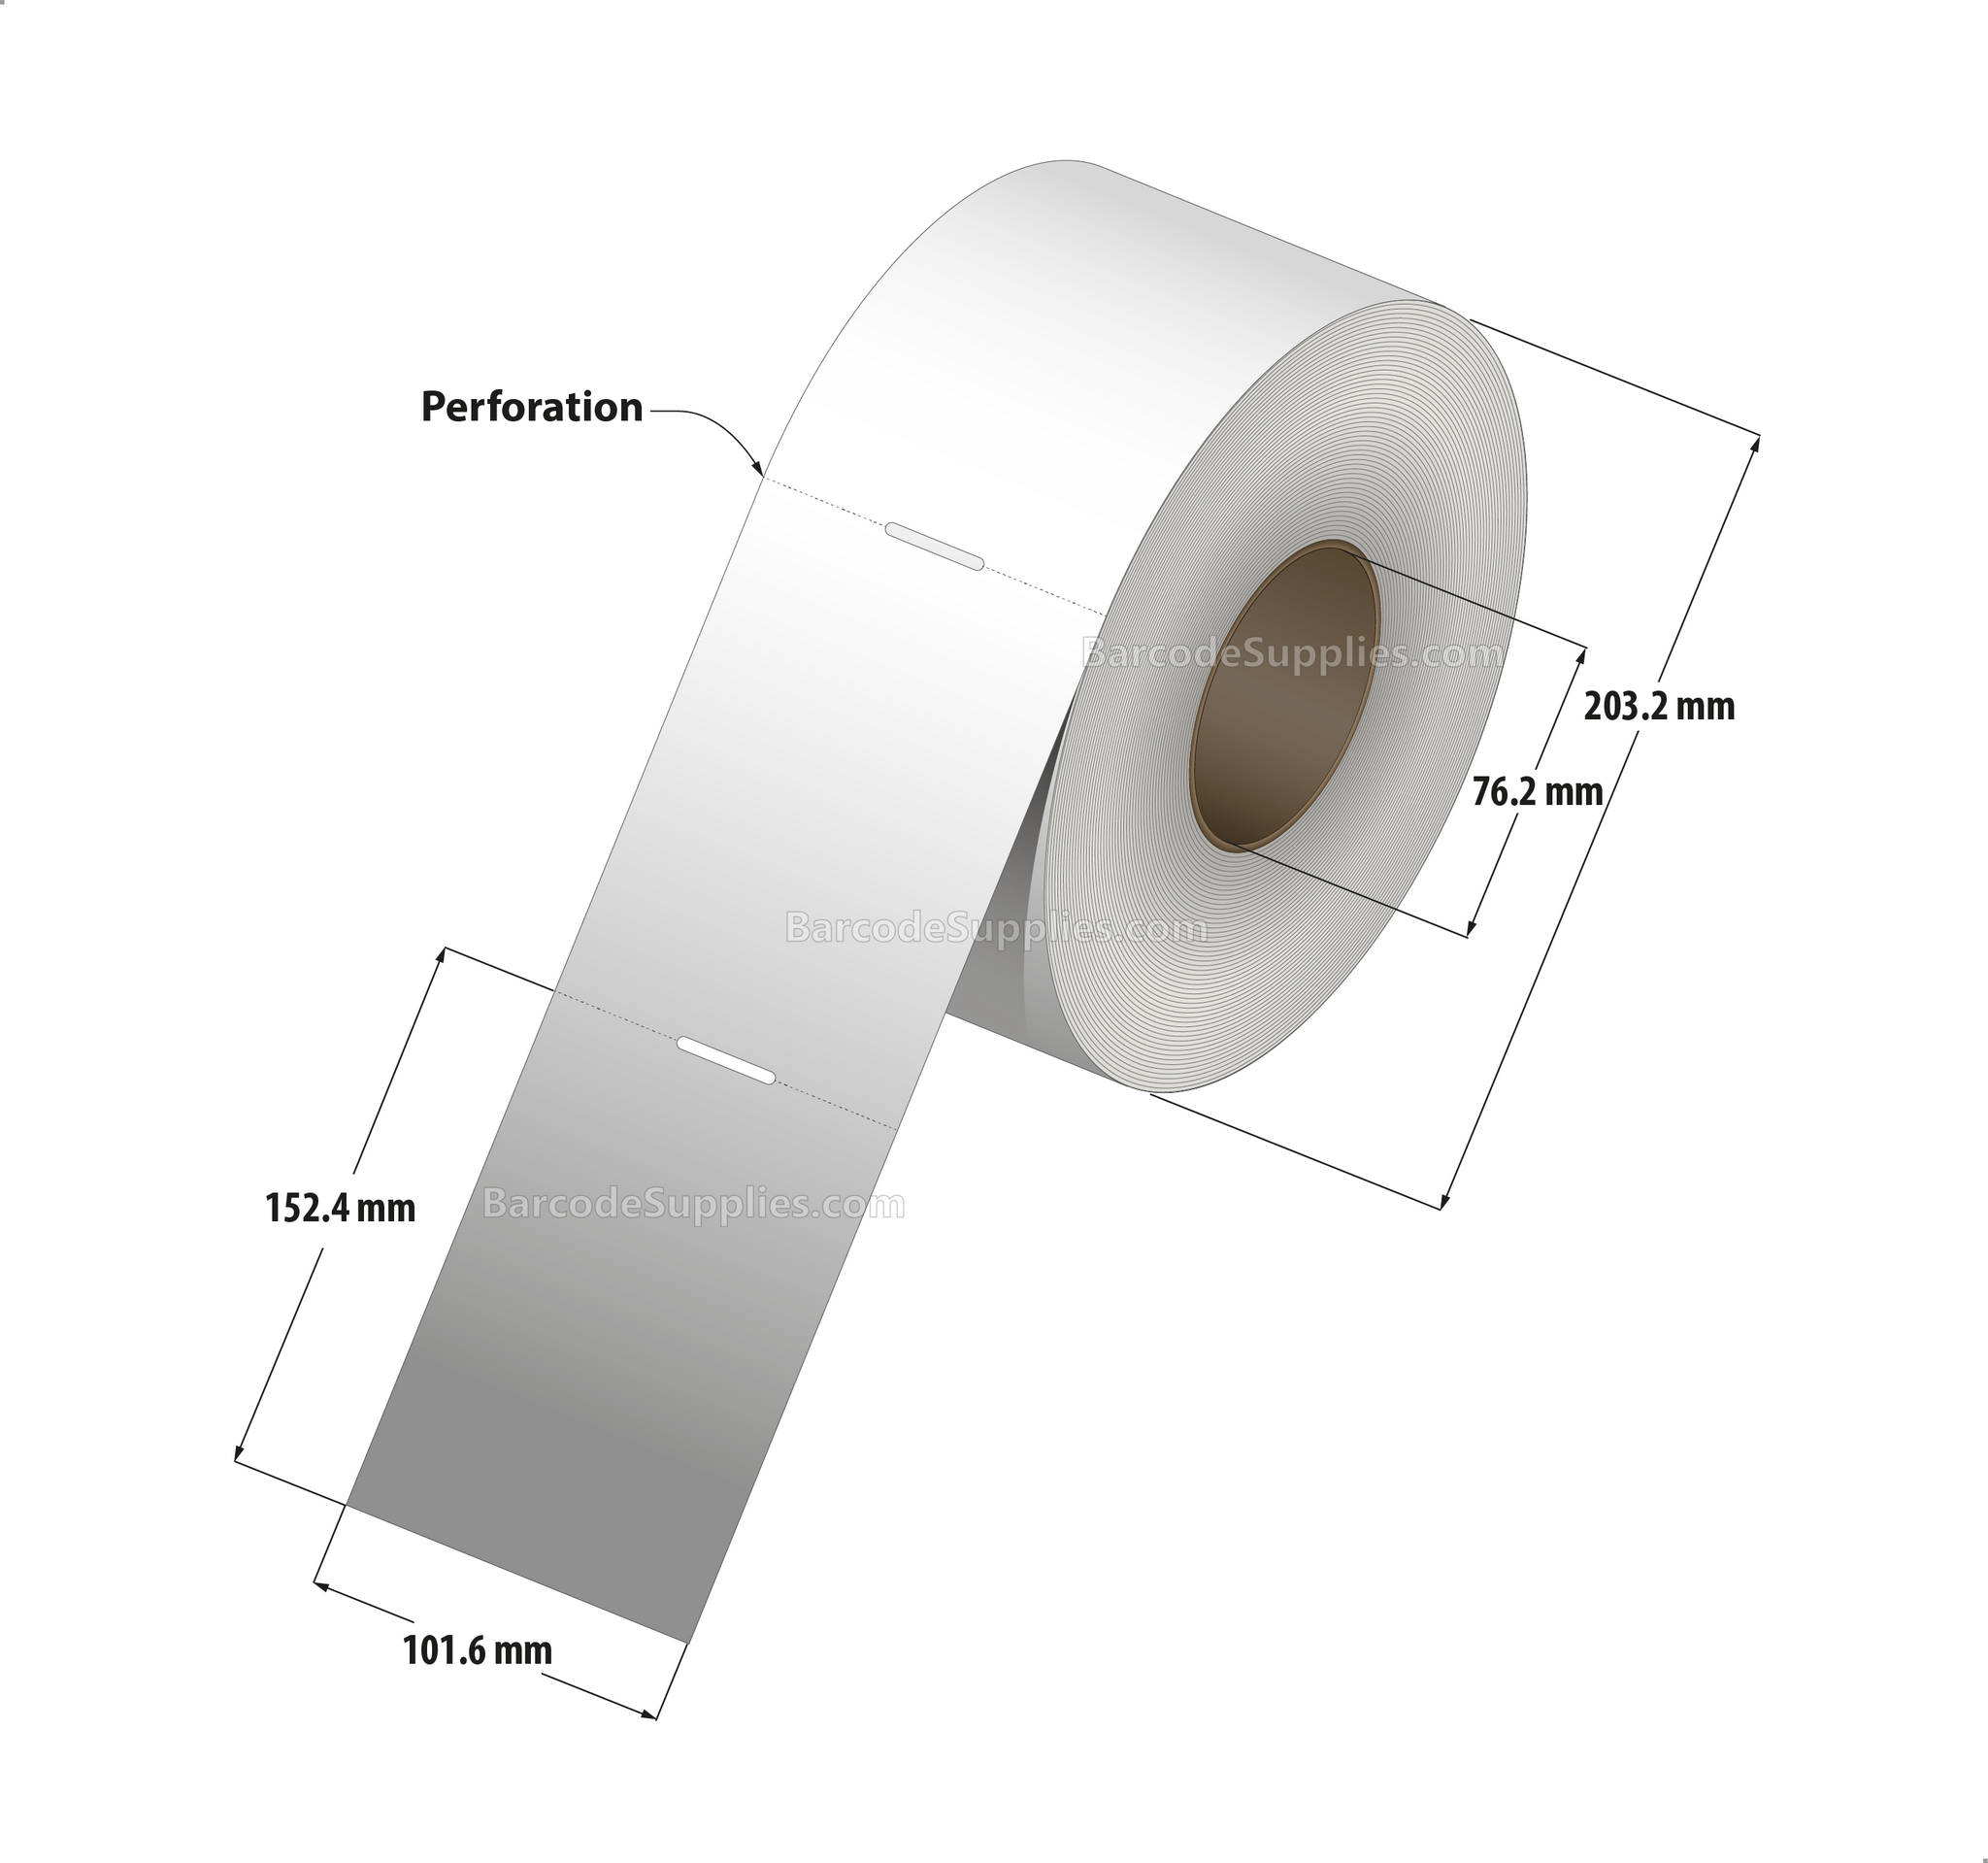 4 x 6 Thermal Transfer White Tags With No Adhesive - Perforated - 1000 Tags Per Roll - Carton Of 4 Rolls - 4000 Tags Total - MPN: TAG46-1P